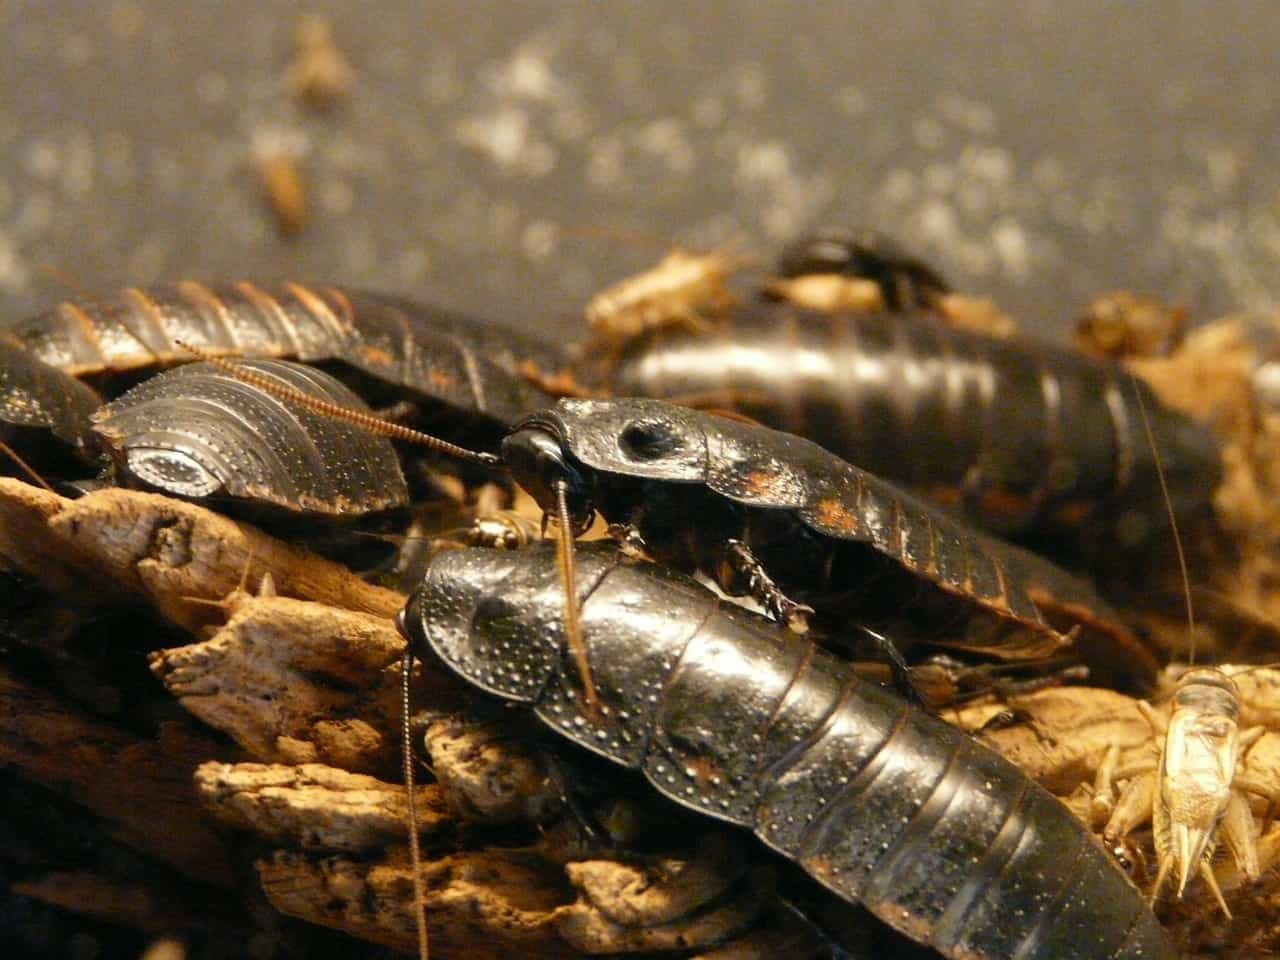 Cockroaches As Pets - Good or Strange